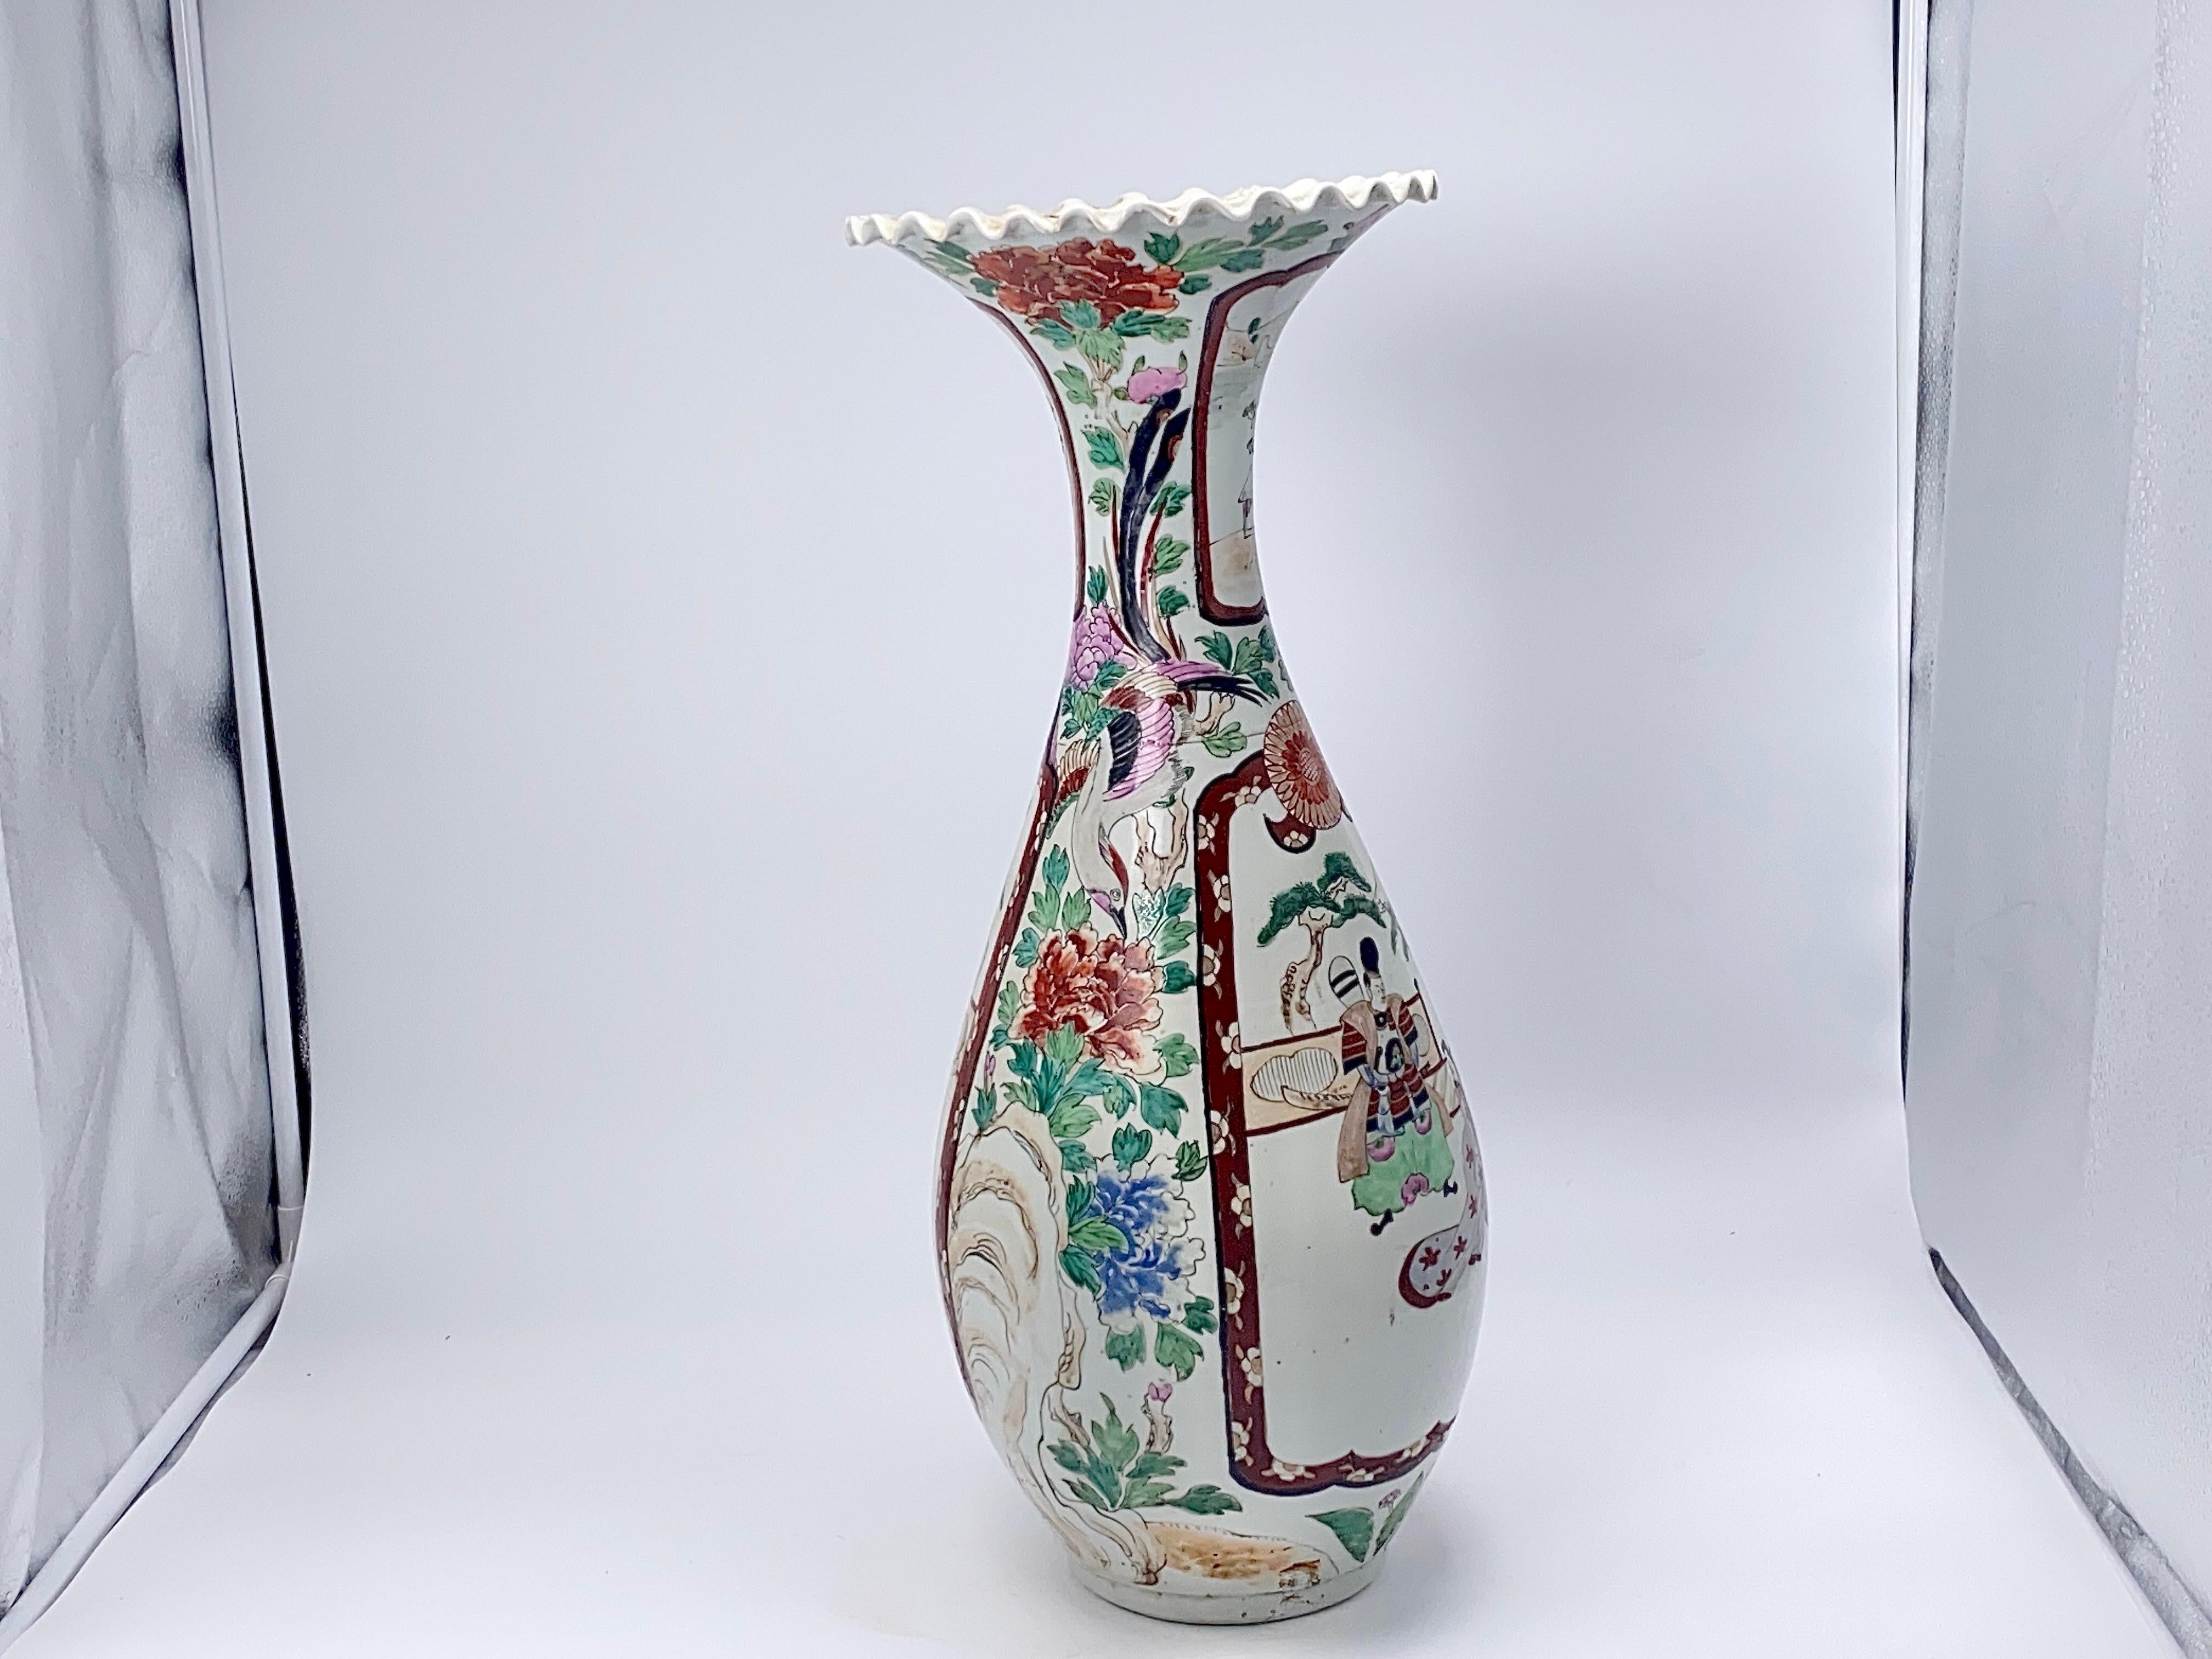 Japanese Imari floor vase offer porcelain construction with each vessel having ruffled rim, hand painted allover floral enamel decoration and garden reserves with birds, and characters, a Samourai and a Woman, c1930. It has been made in Japan circa